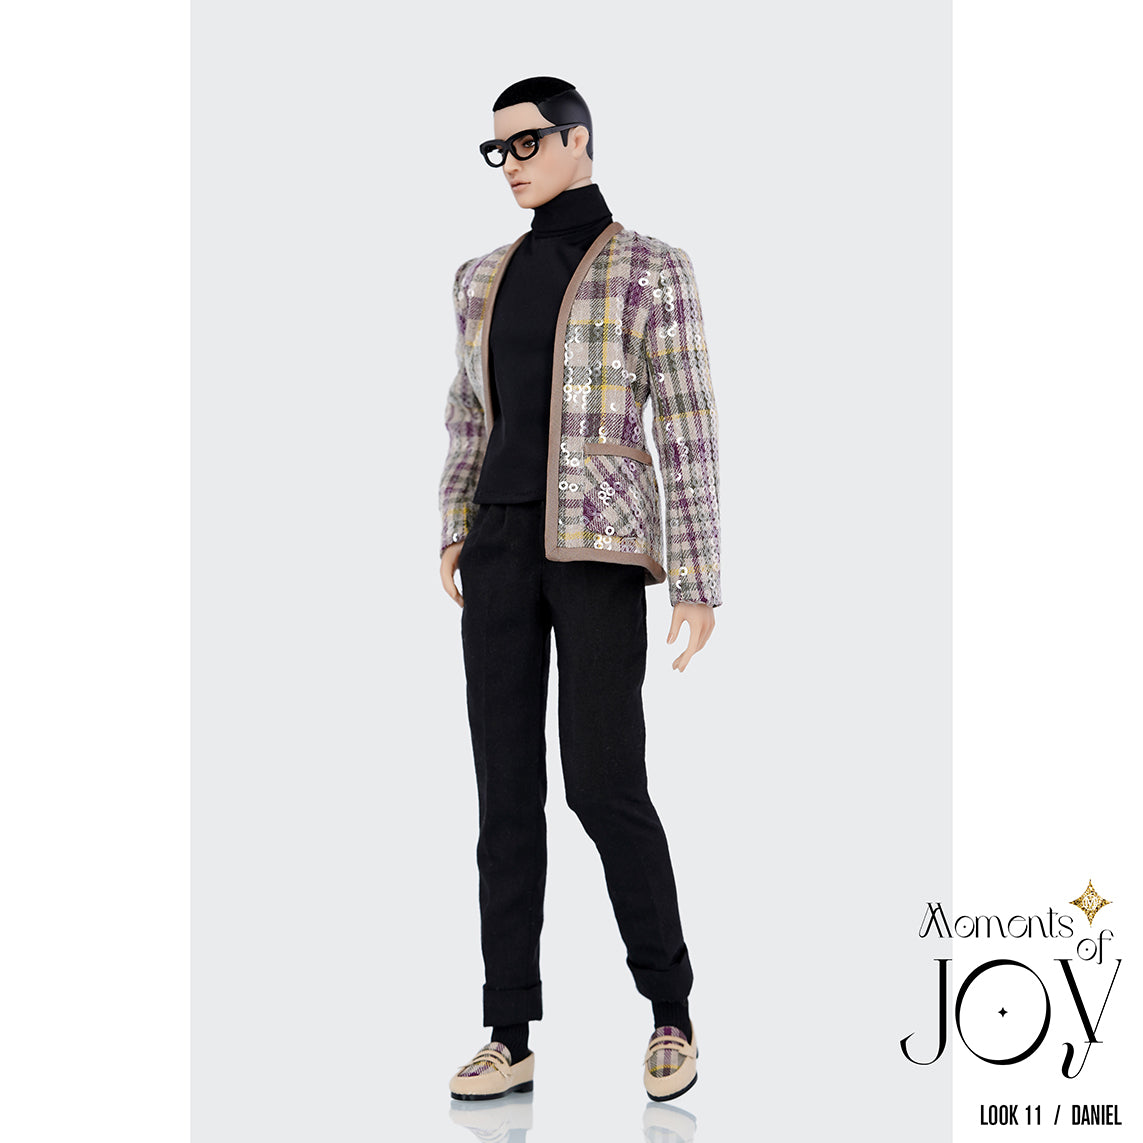 Muses Moments of Joy Men's Fashion Look 11